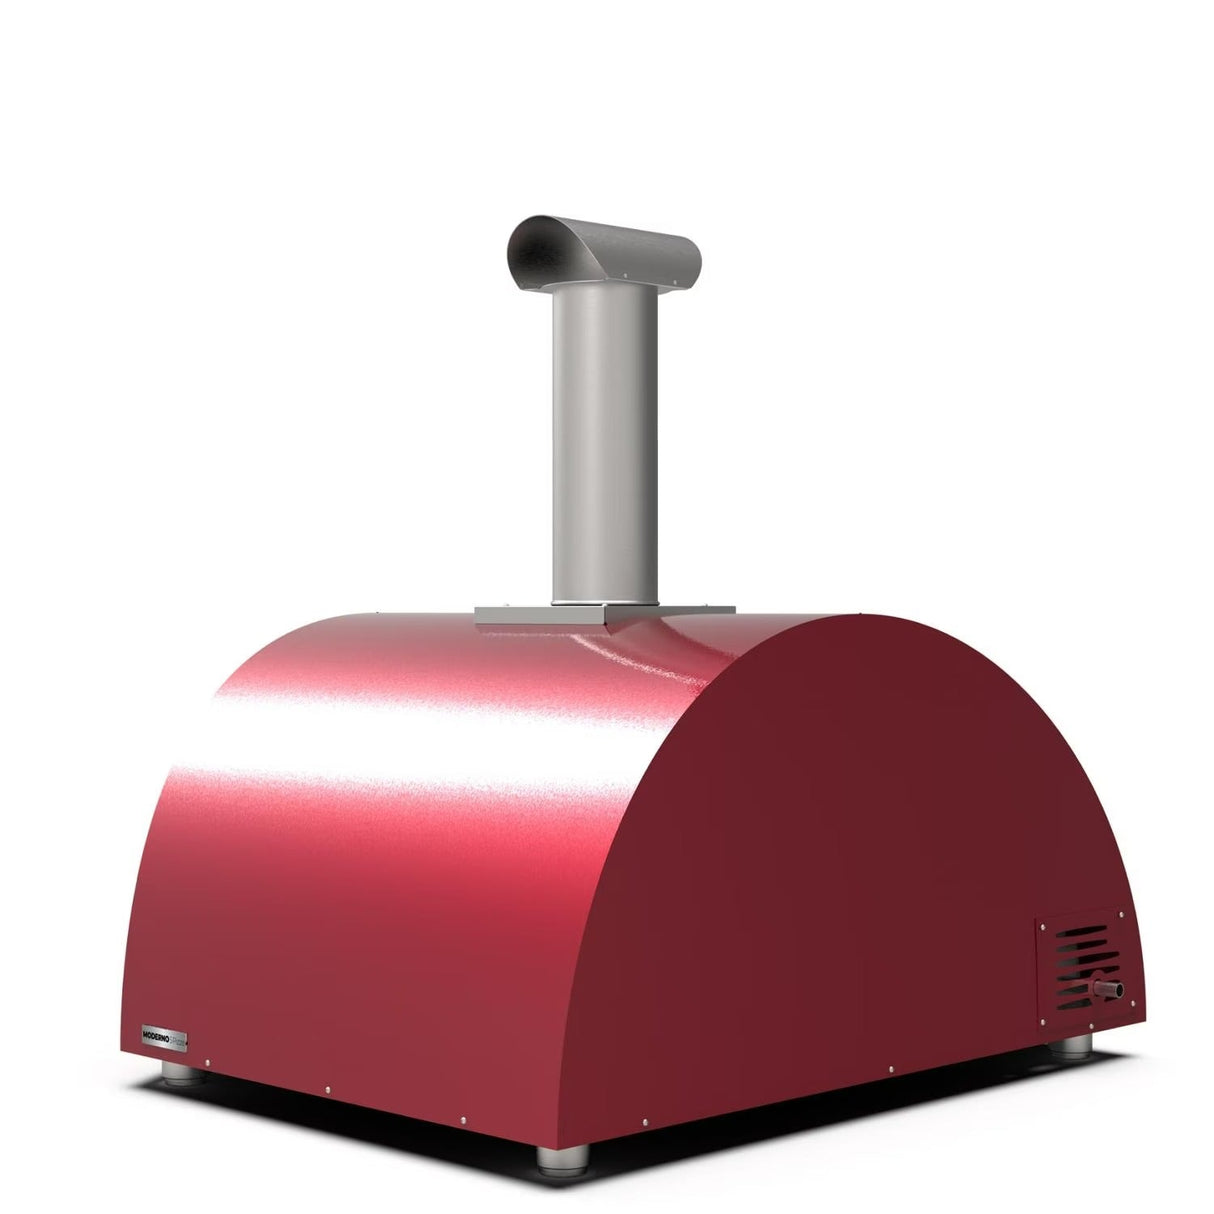 Alfa Moderno 5 Pizze Outdoor Gas Pizza Oven with Base - Freestanding - Antique Red